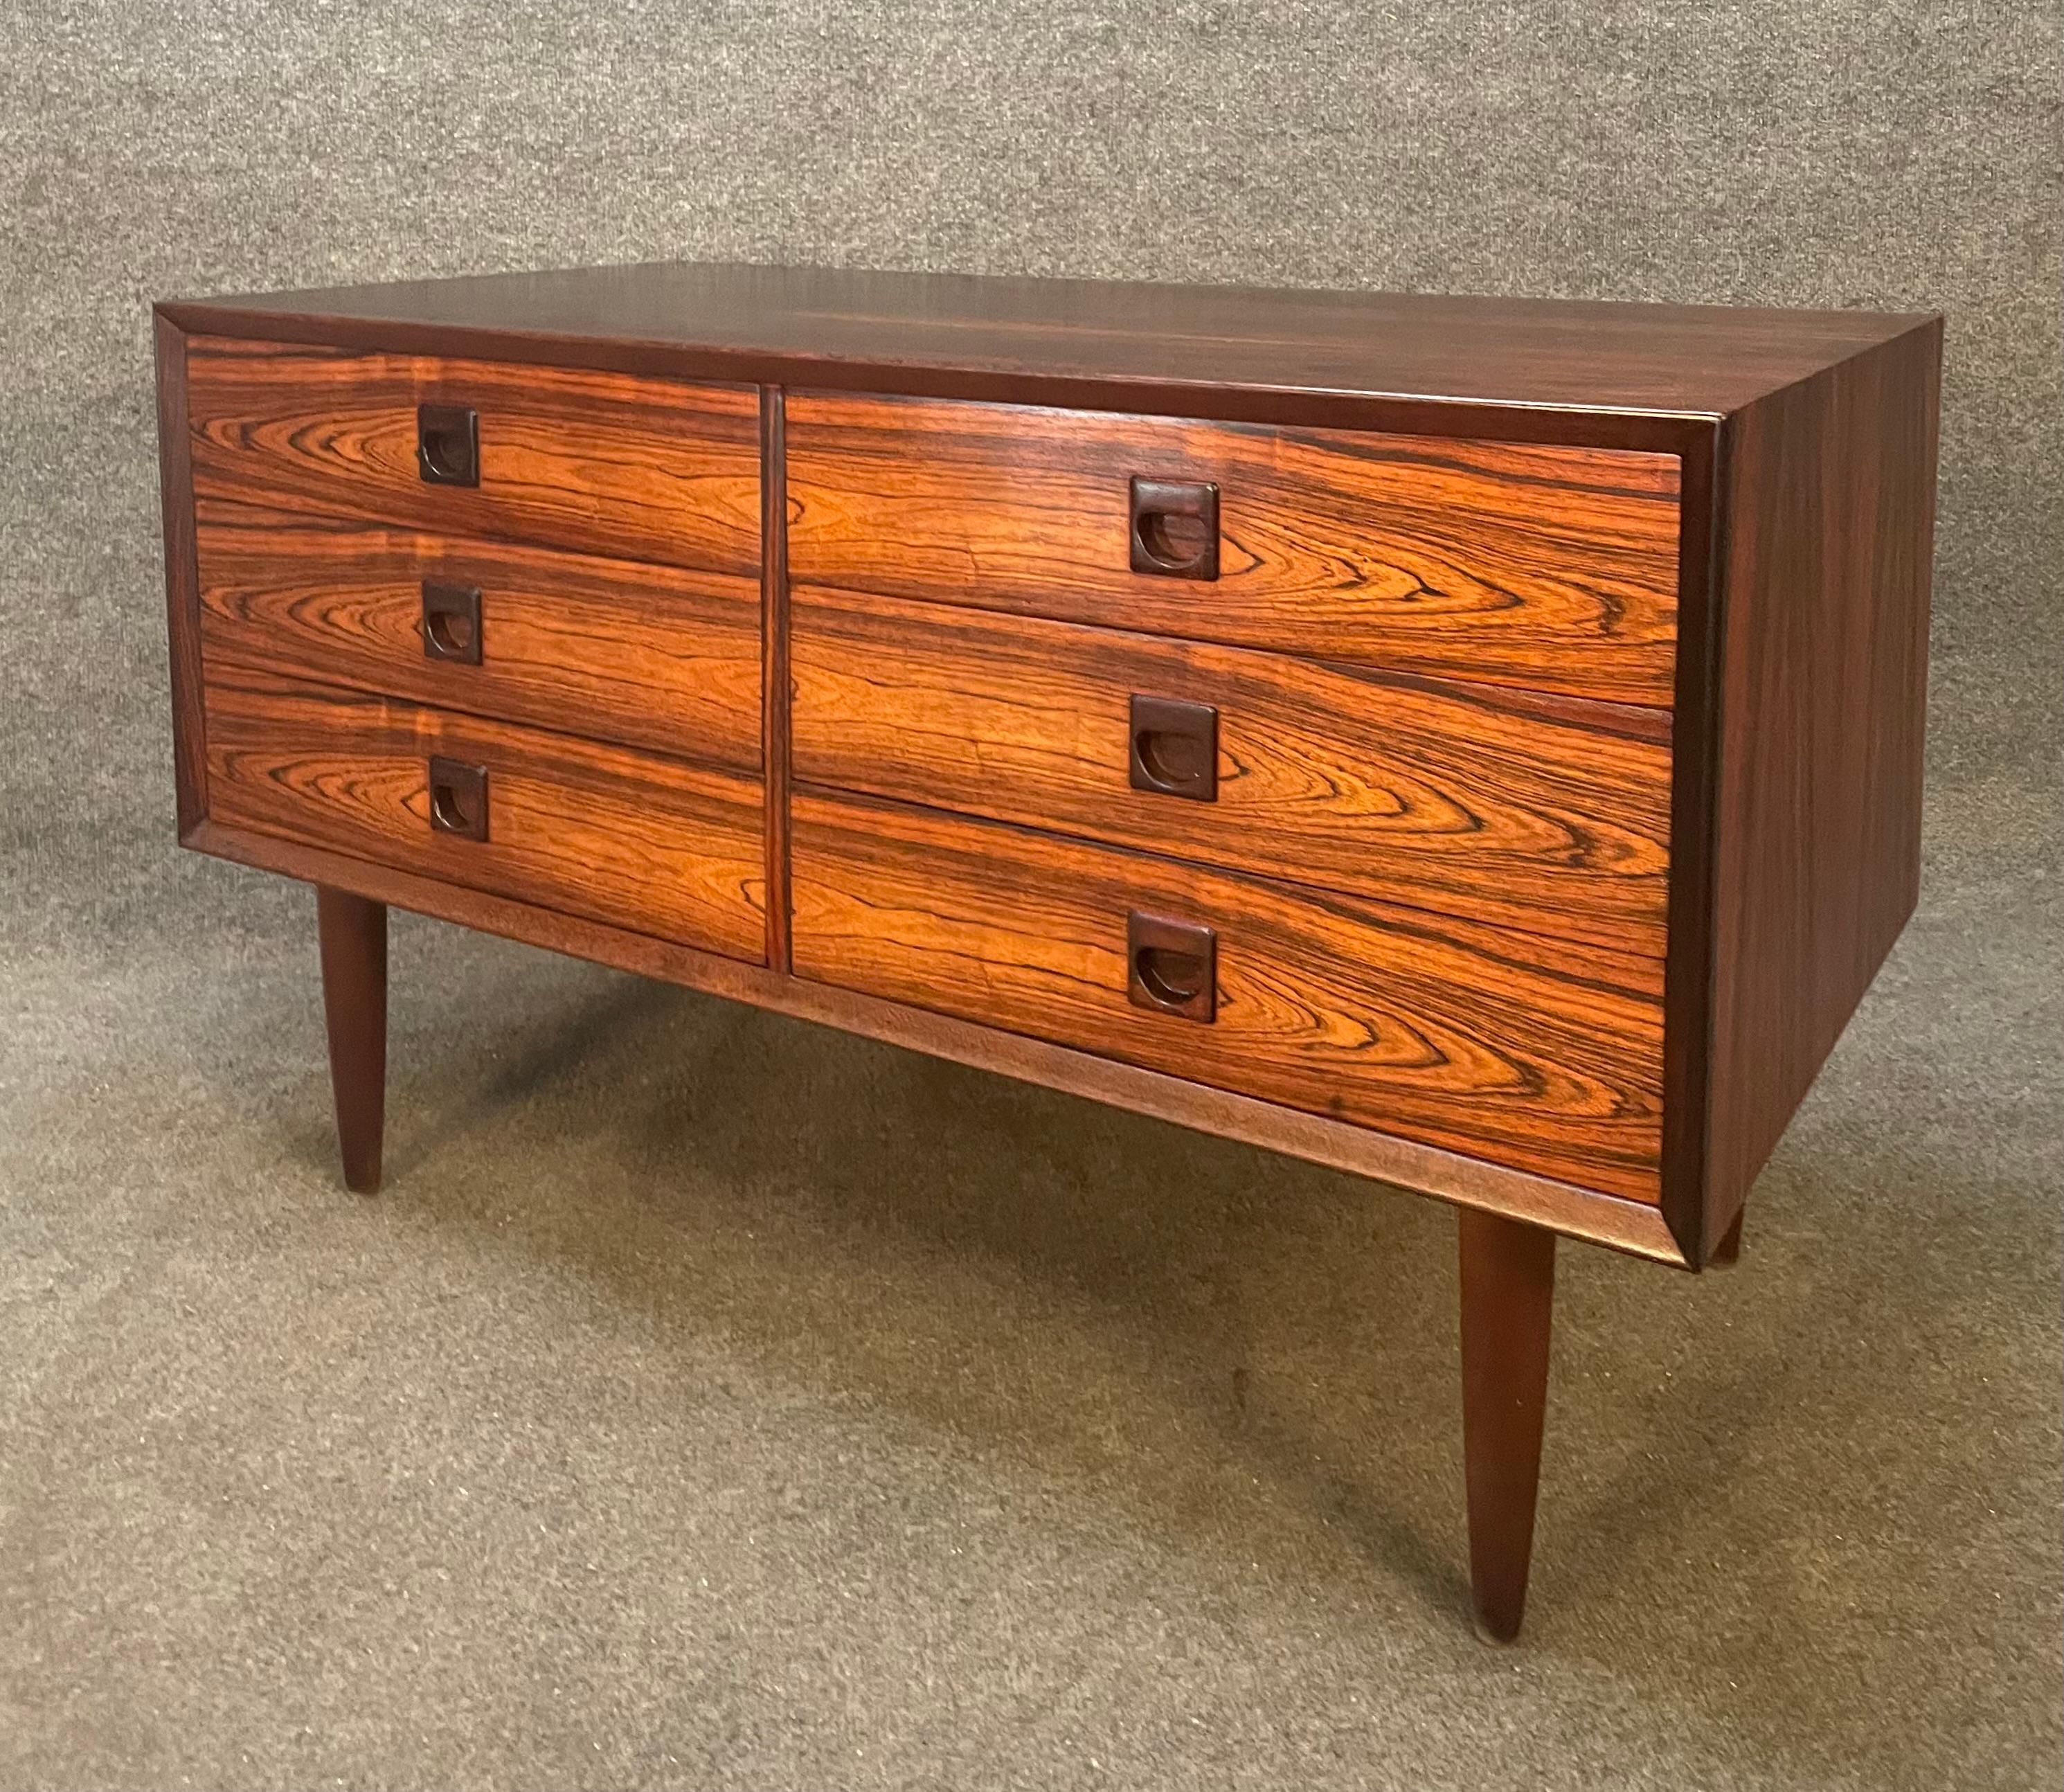 Here is a beautiful scandinavian modern compact credenza - console in rosewood manufactured by Brouer Mobelfabrik in Denmark in the 1960's.
This exquisite piece, recently imported from Europe to California before its refinishing, features a vibrant